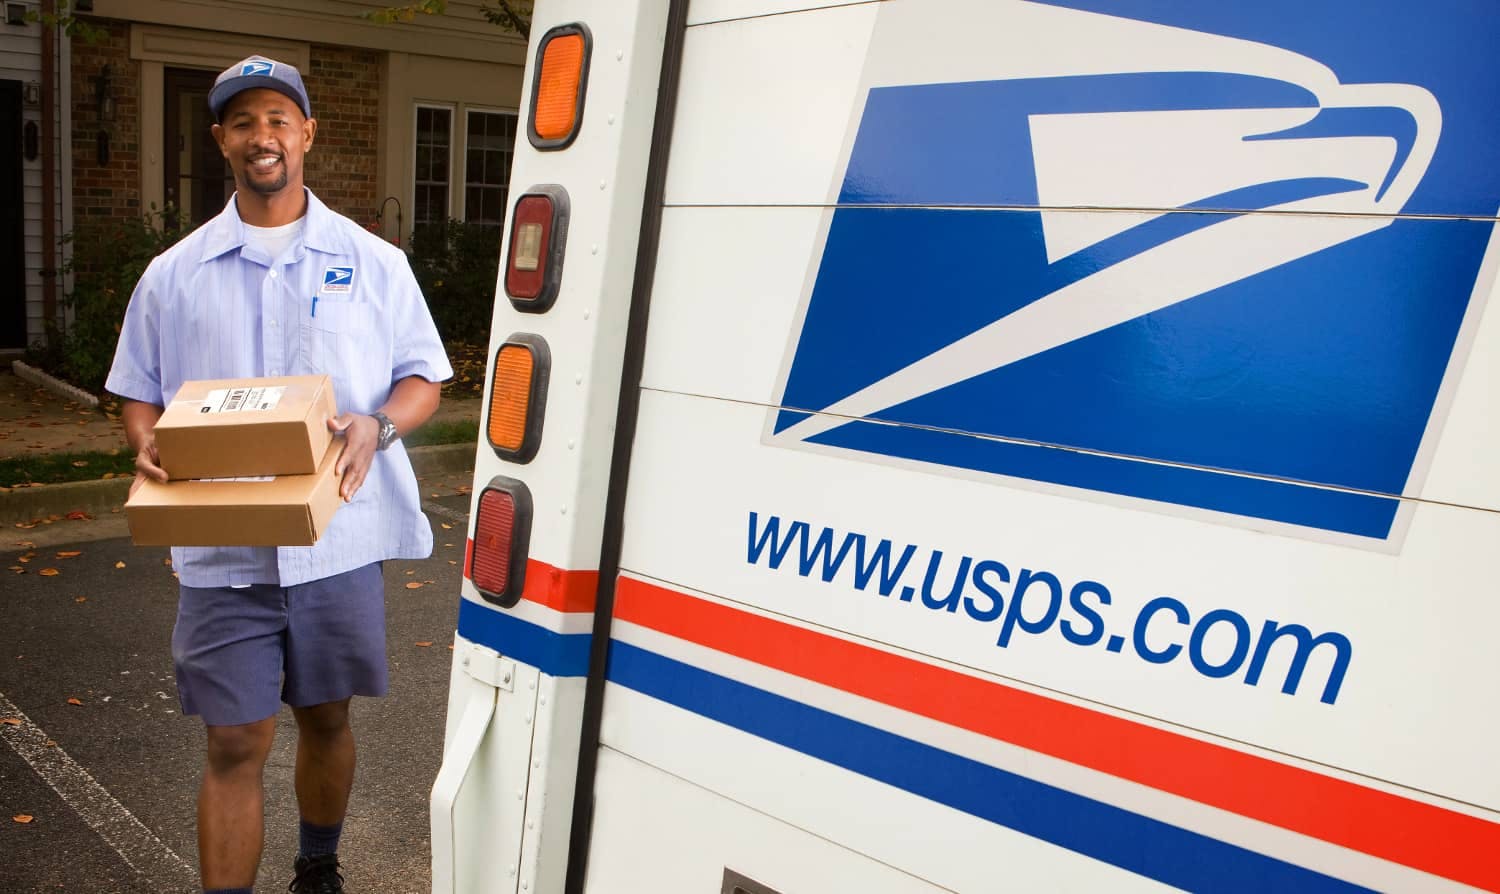 USPS Human Resources: What You Need To Know